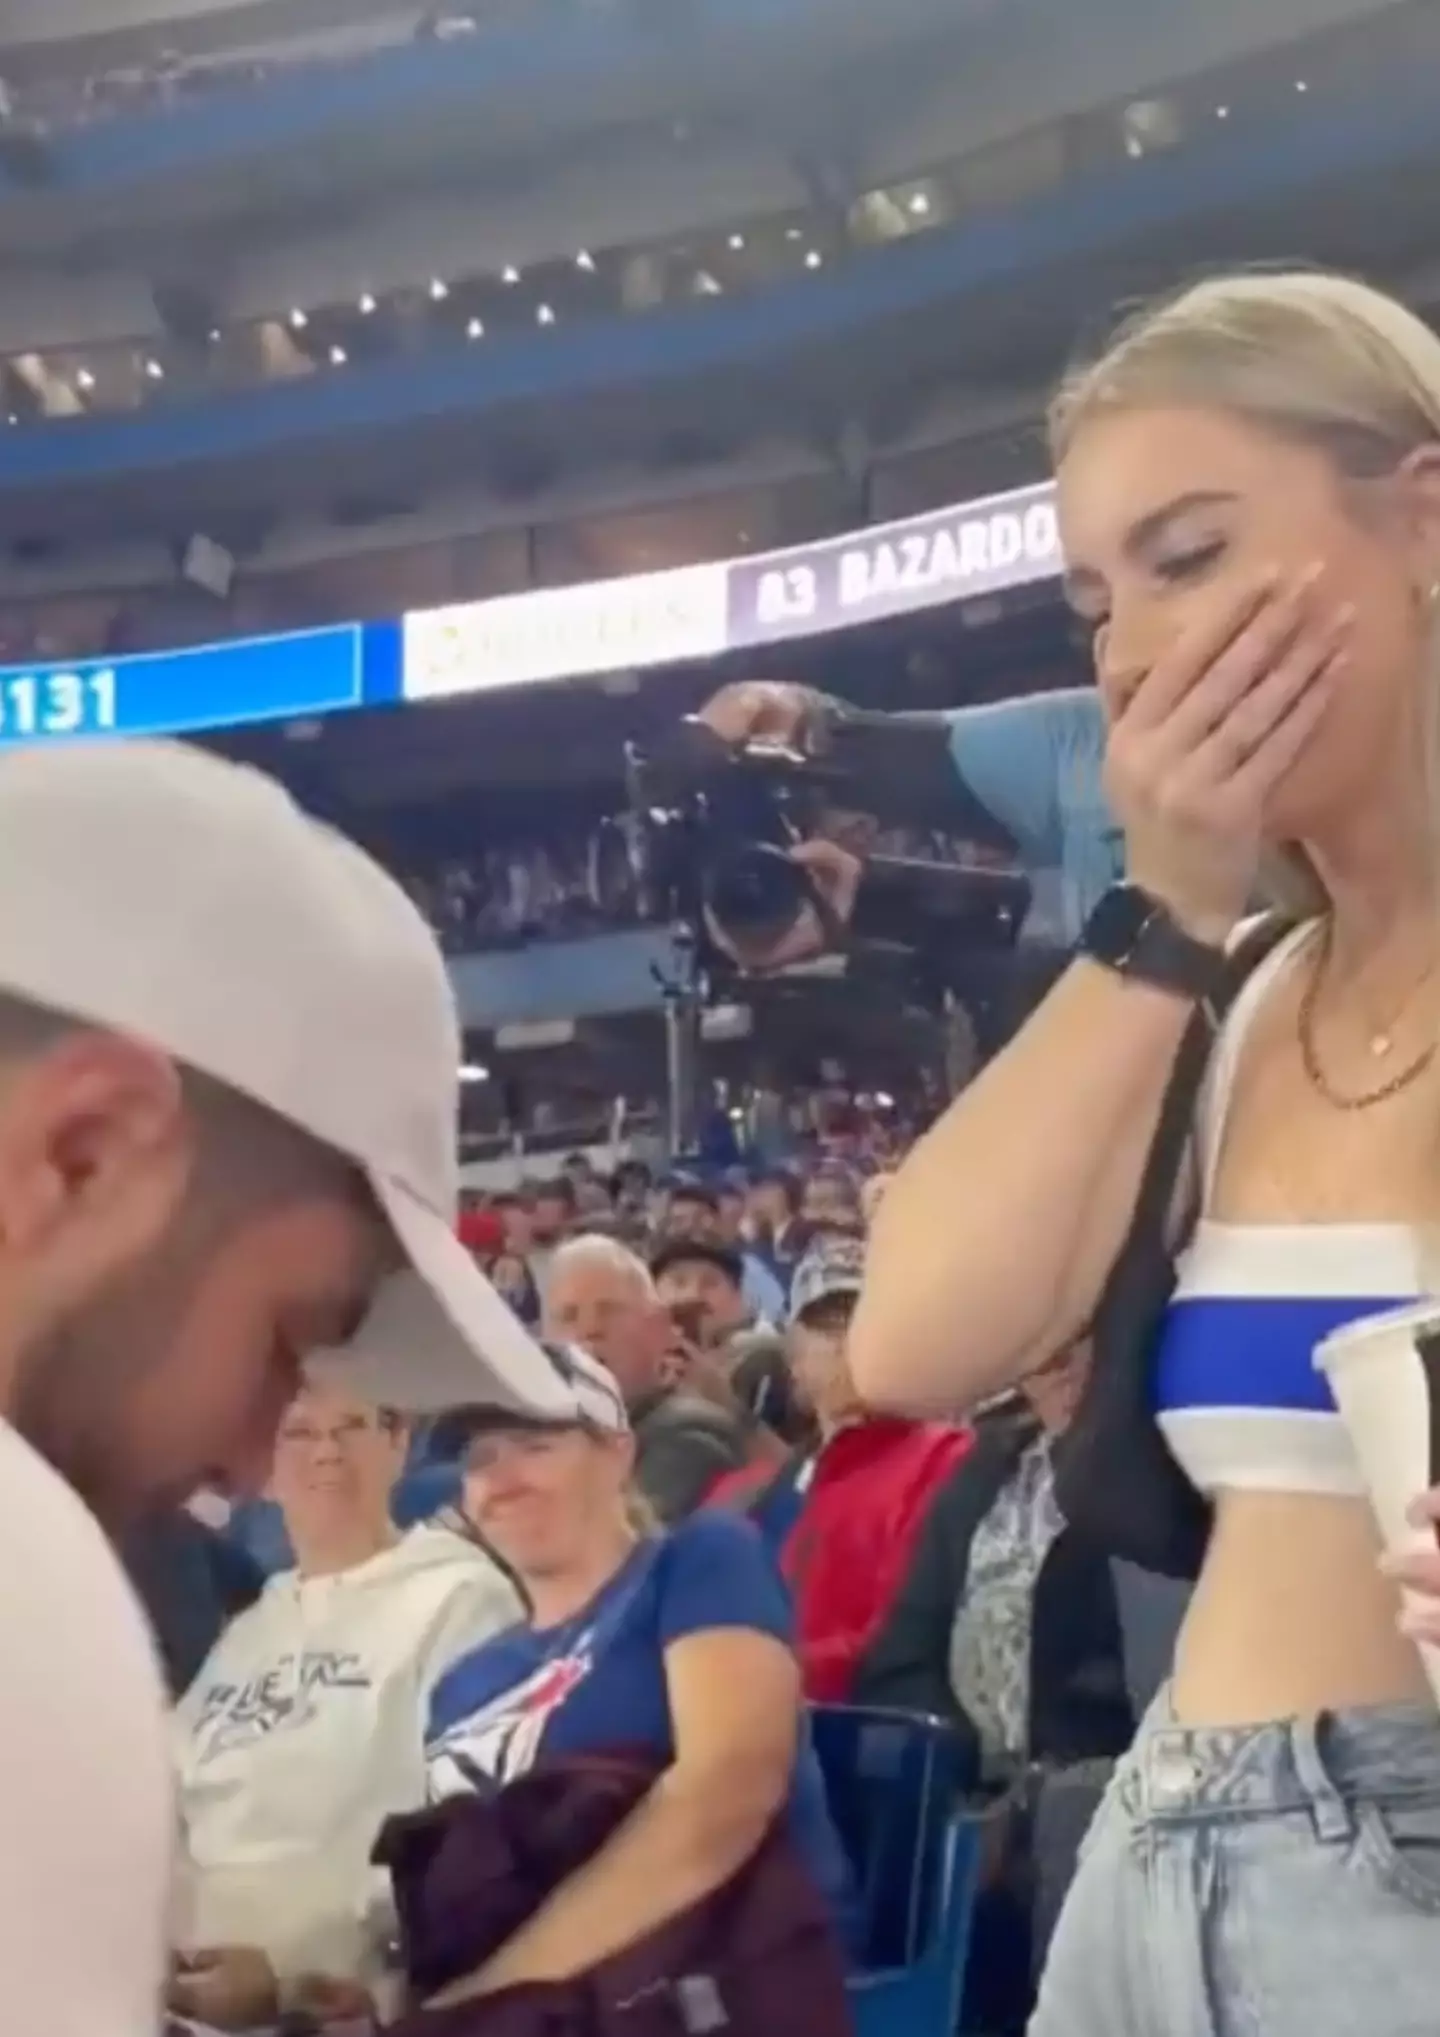 This baseball proposal went horribly wrong in seconds.